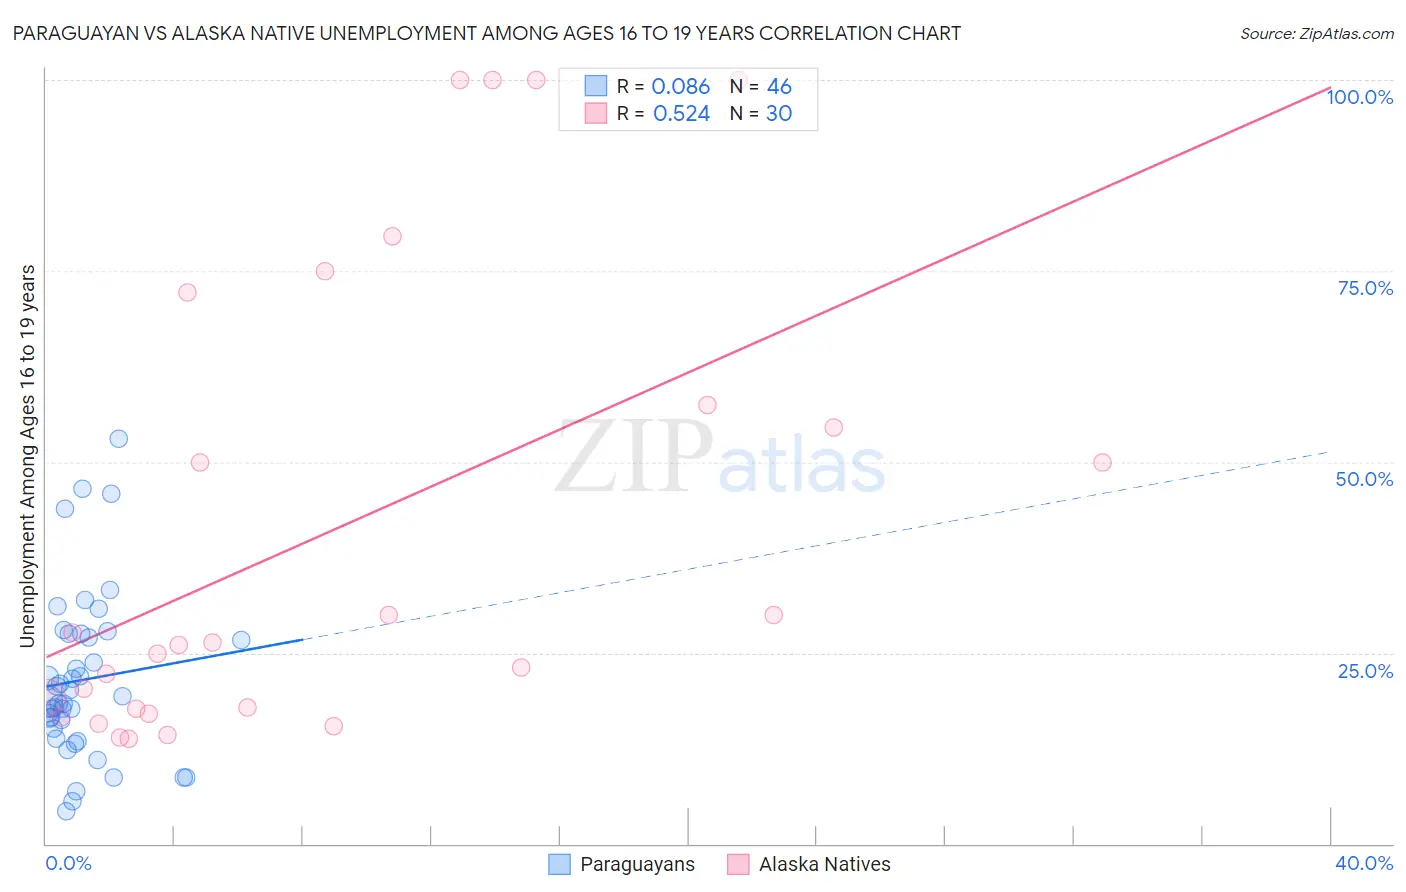 Paraguayan vs Alaska Native Unemployment Among Ages 16 to 19 years